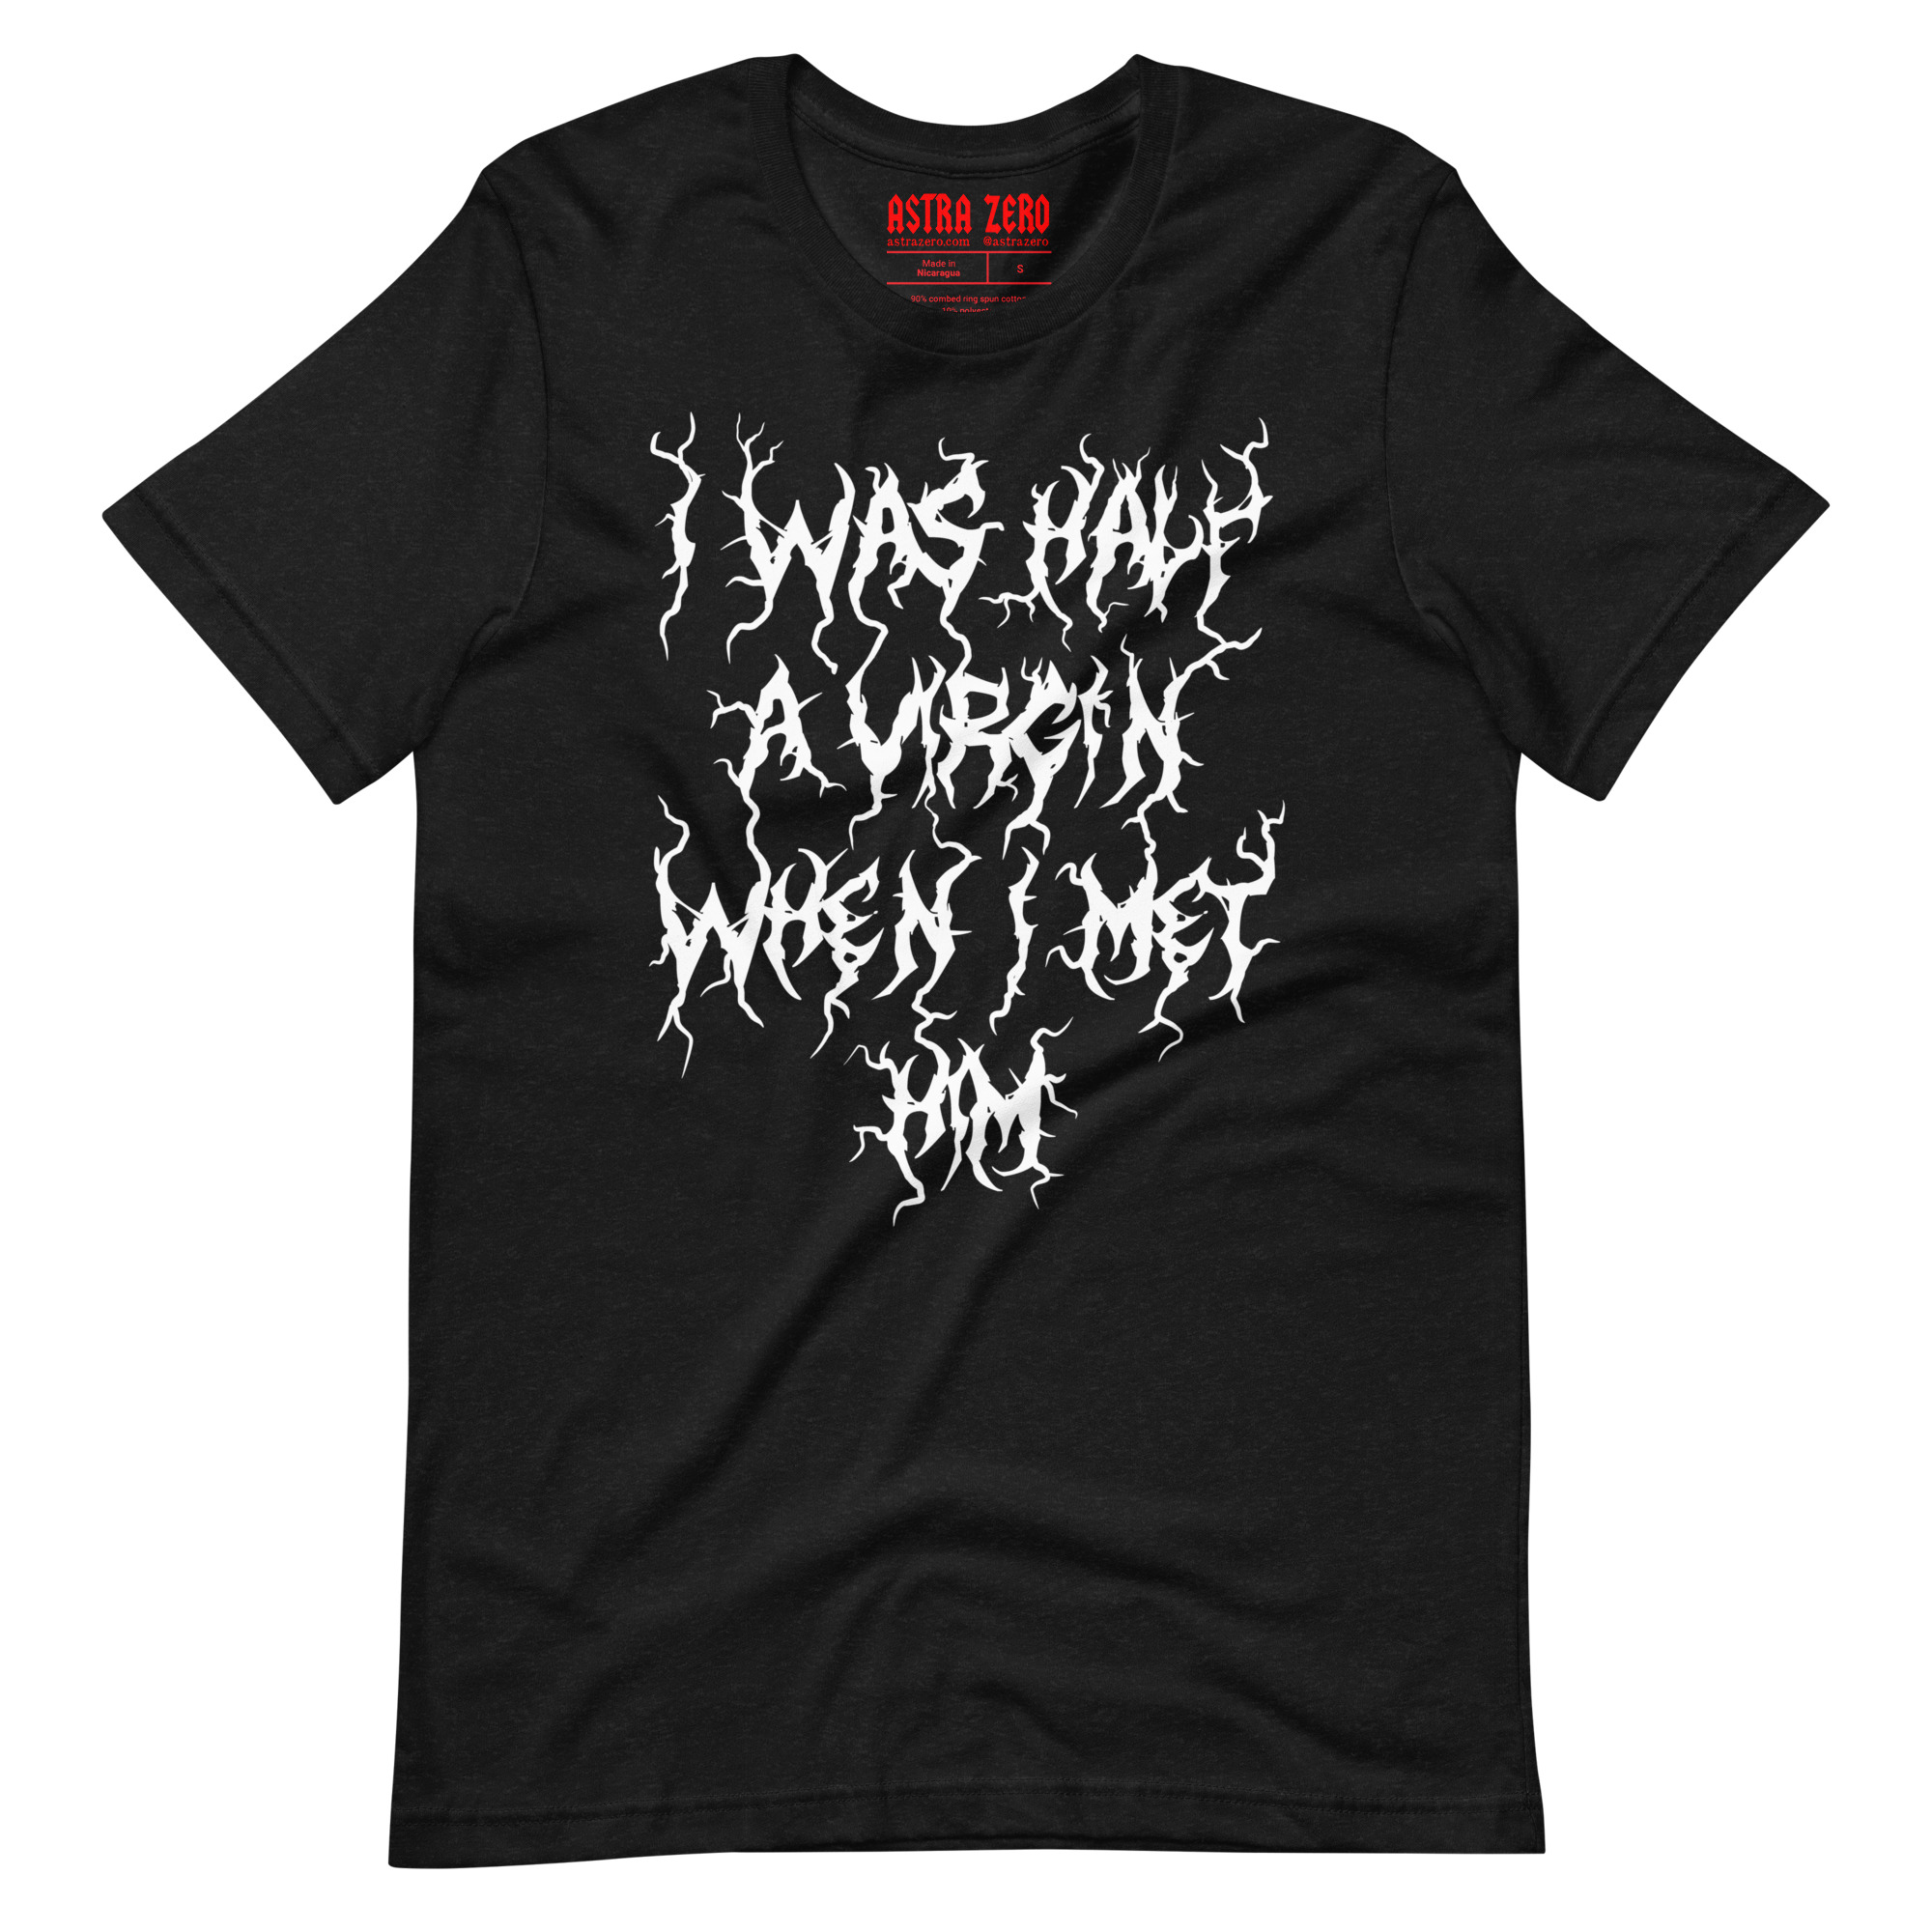 Featured image for “I Was Half a Virgin when I met Him - Unisex t-shirt”